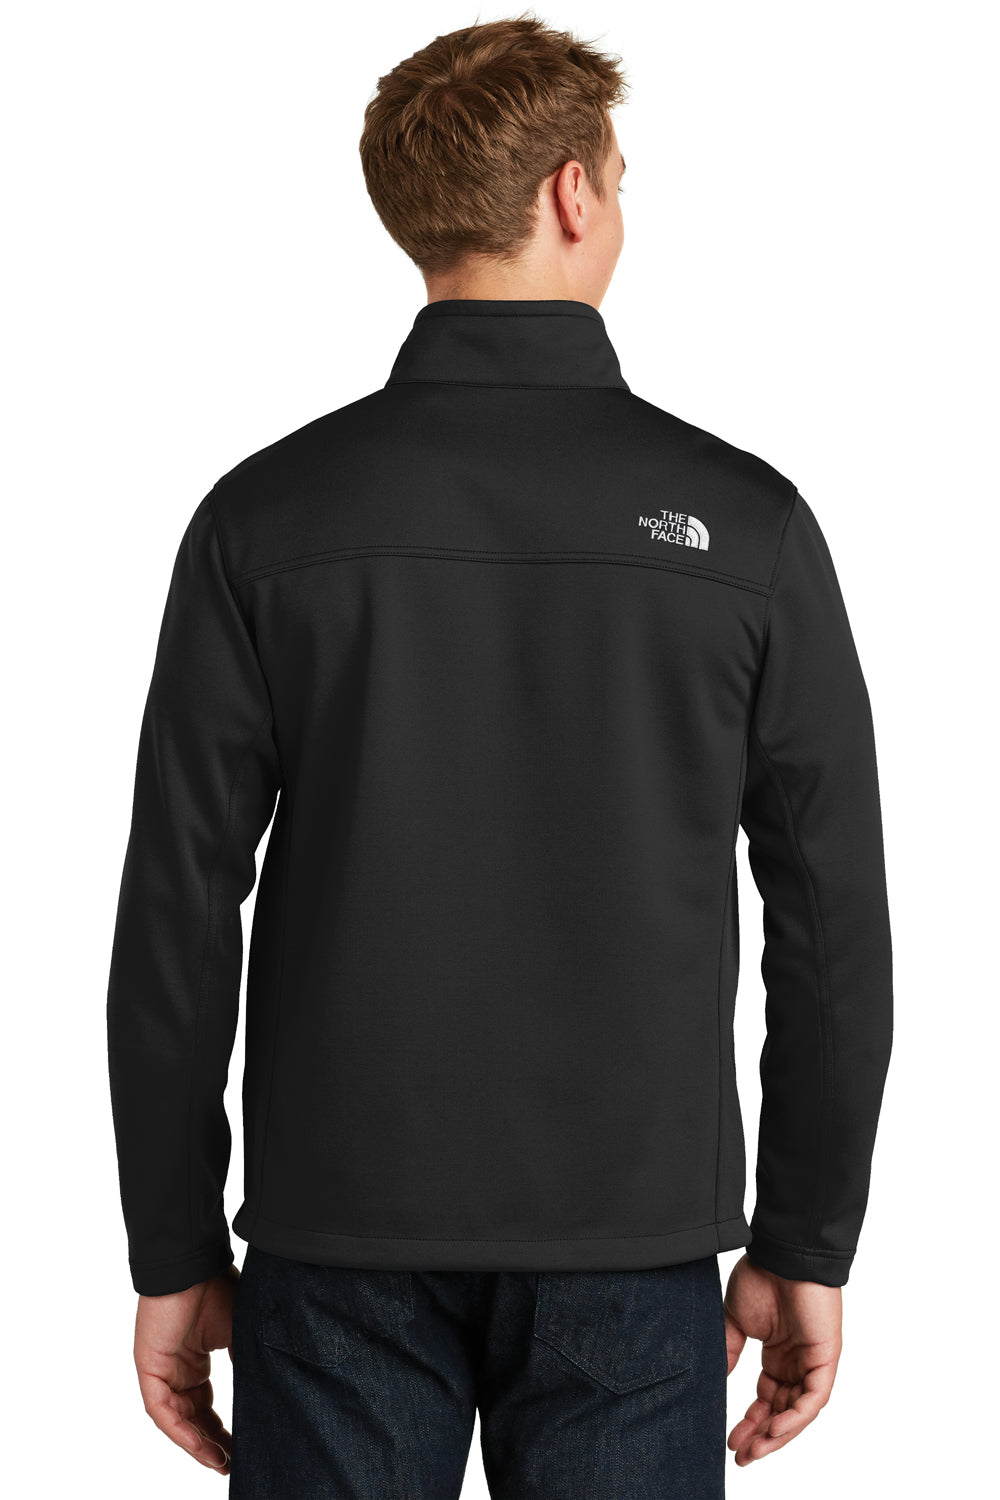 The North Face NF0A3LGX Mens Ridgeline Wind & Water Resistant Full Zip Jacket Black Back